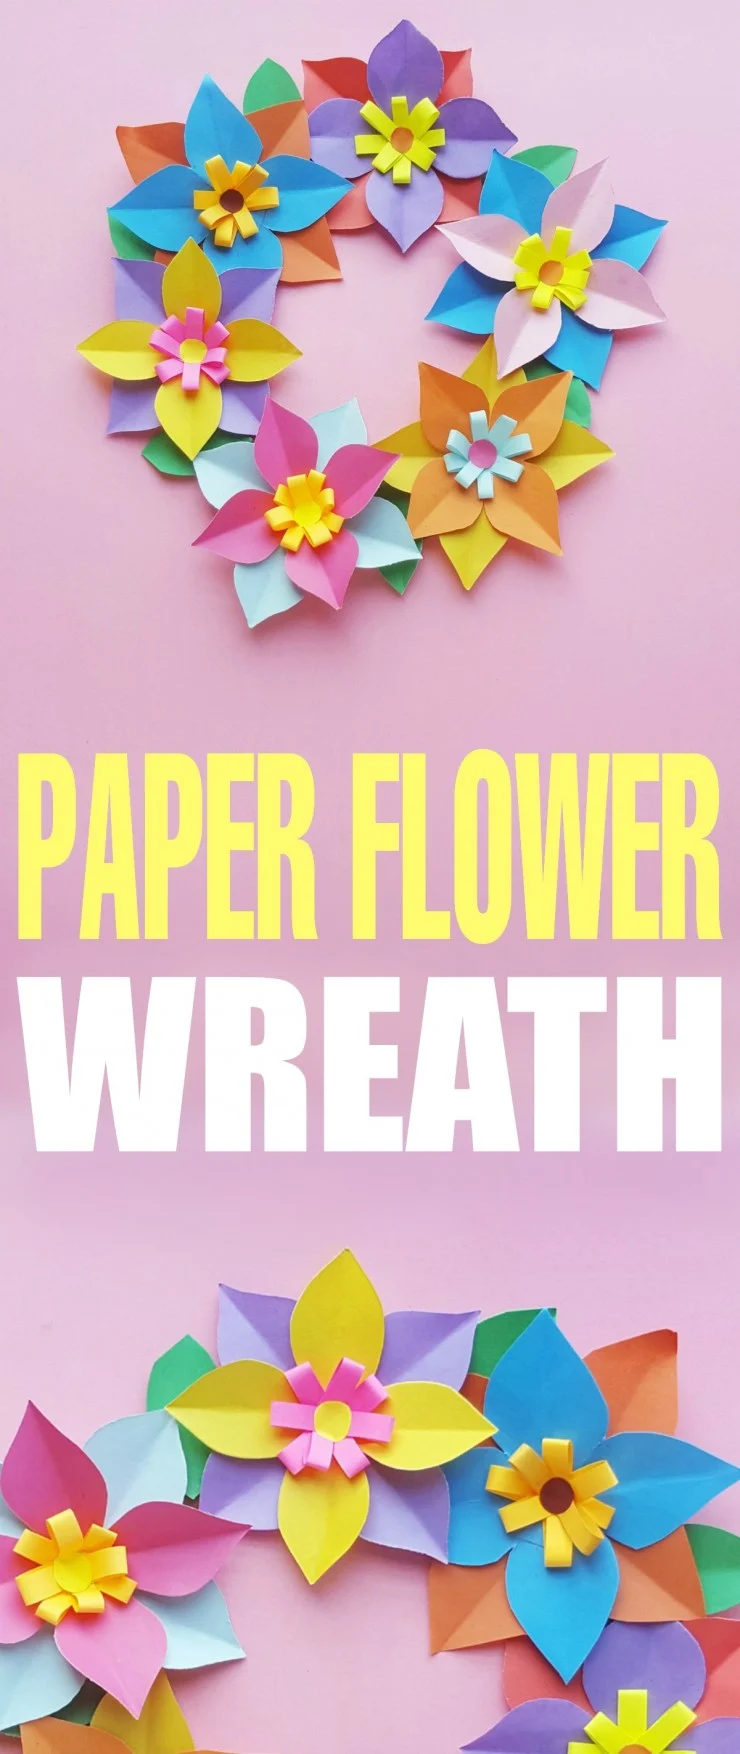 This paper flower wreath is a fun spring or summer craft for kids.  Use the free printable template to create the flowers or allow your kids to design their very own flowers for a unique look all of their own!